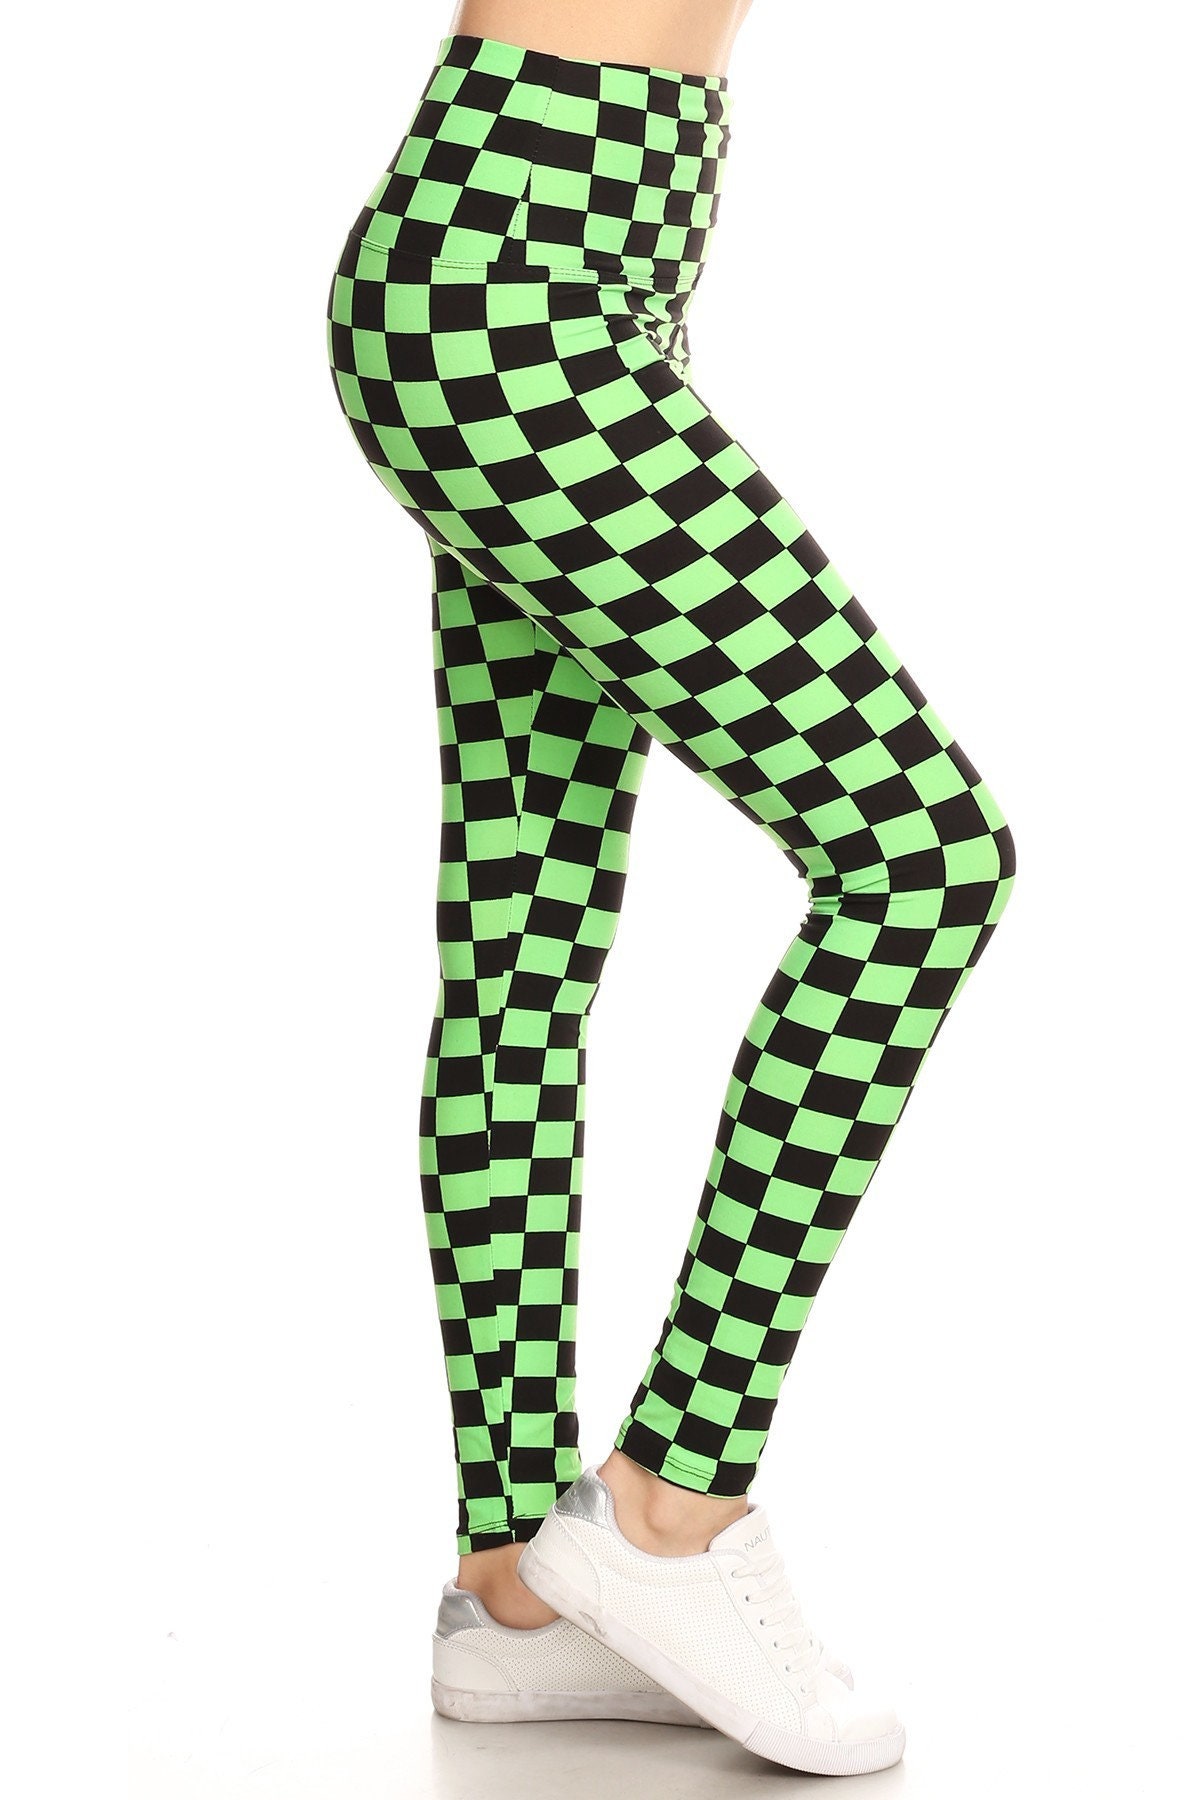 Multi Color Classic Checkered Pattern Full Length Yoga Style - Etsy